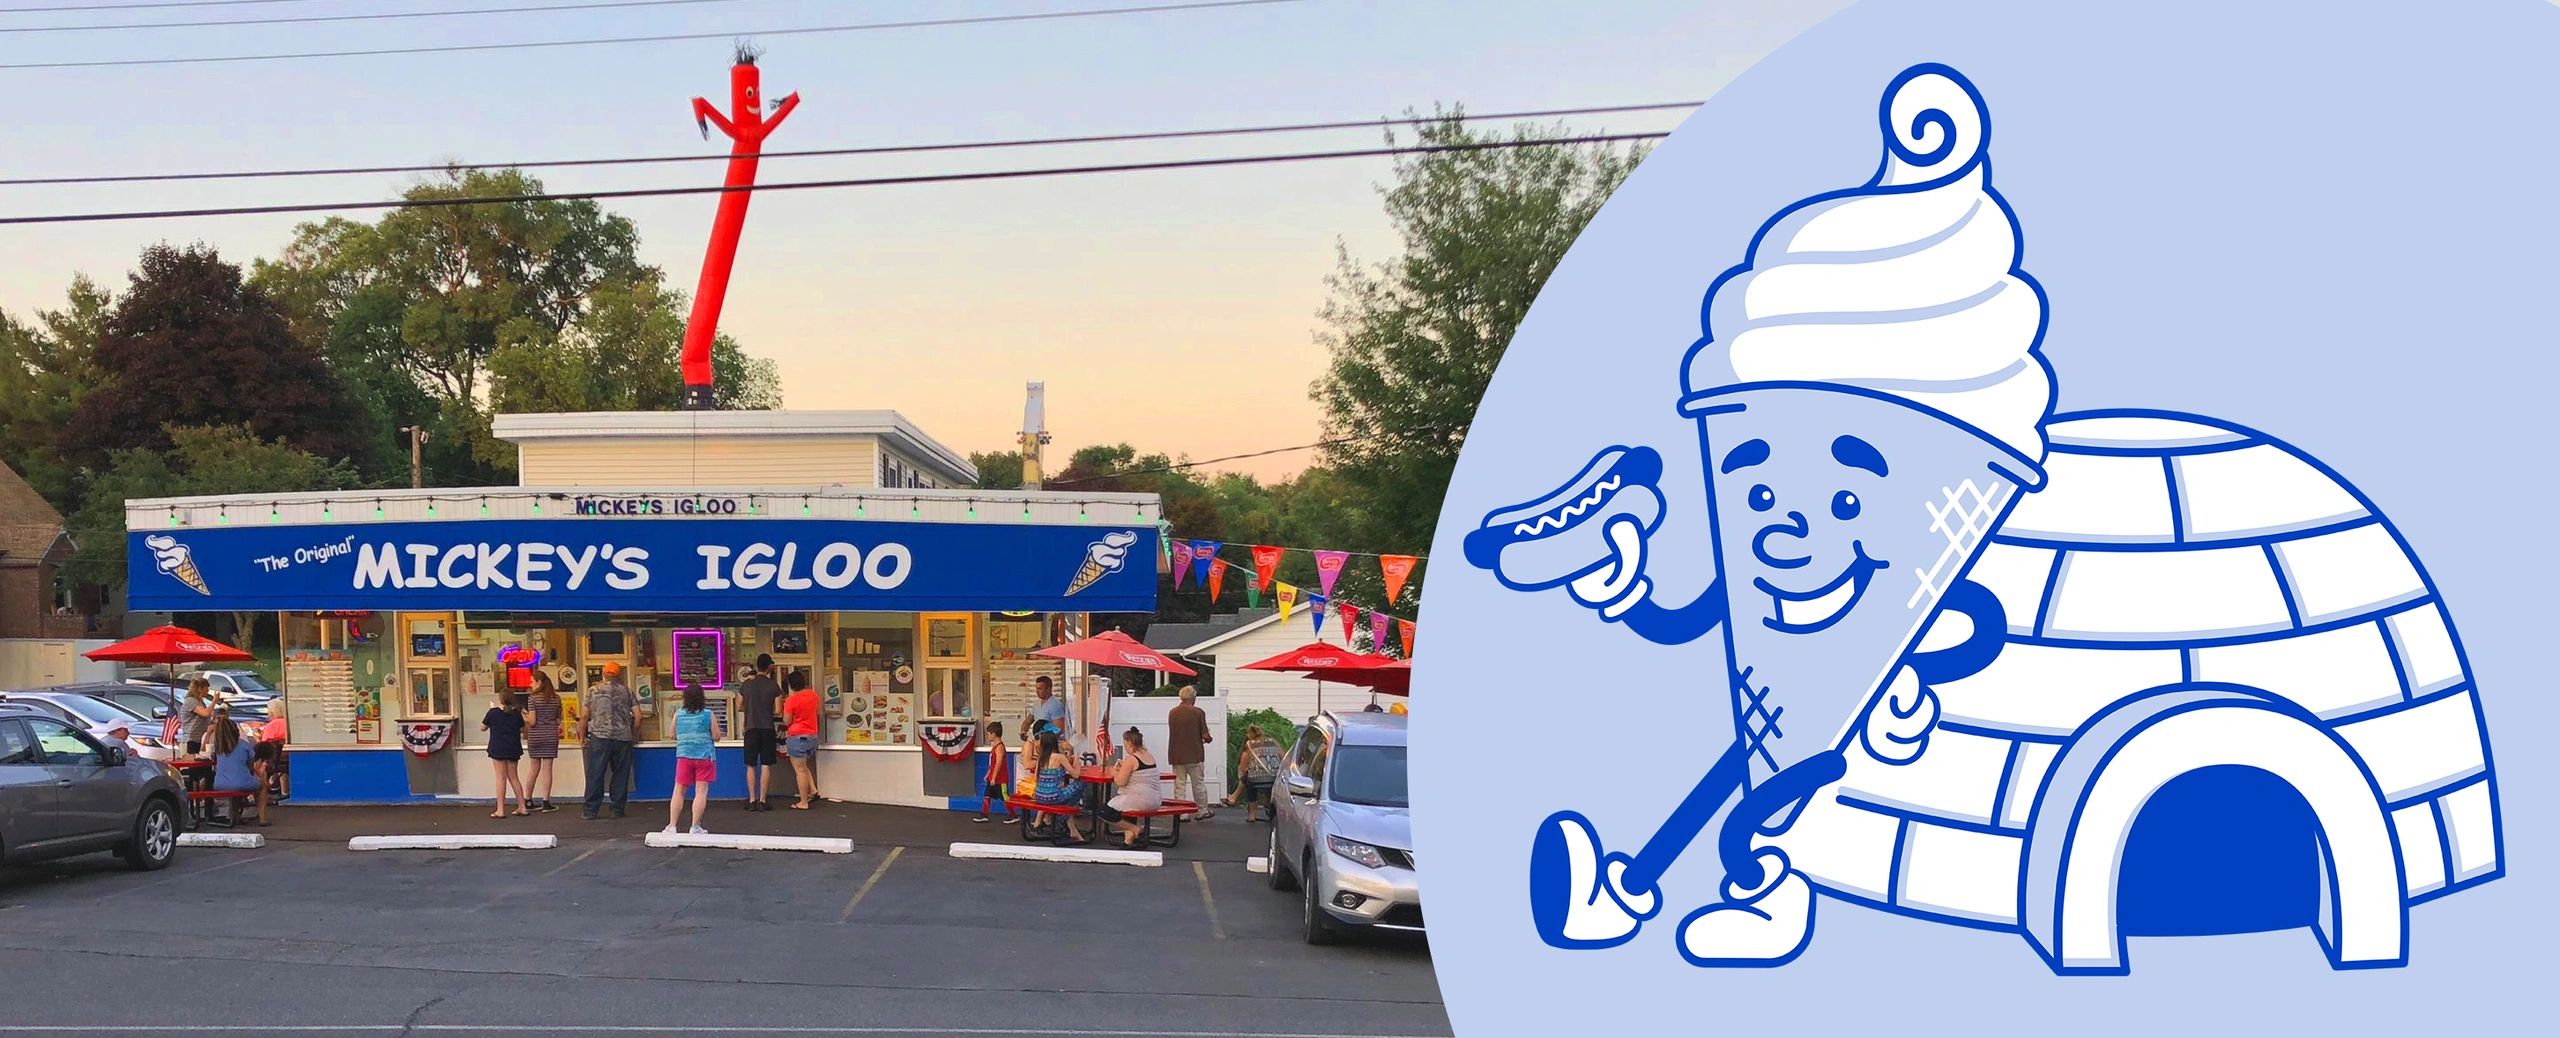 Photo of a roadside ice cream shop with an illustration of an ice cream man mascot